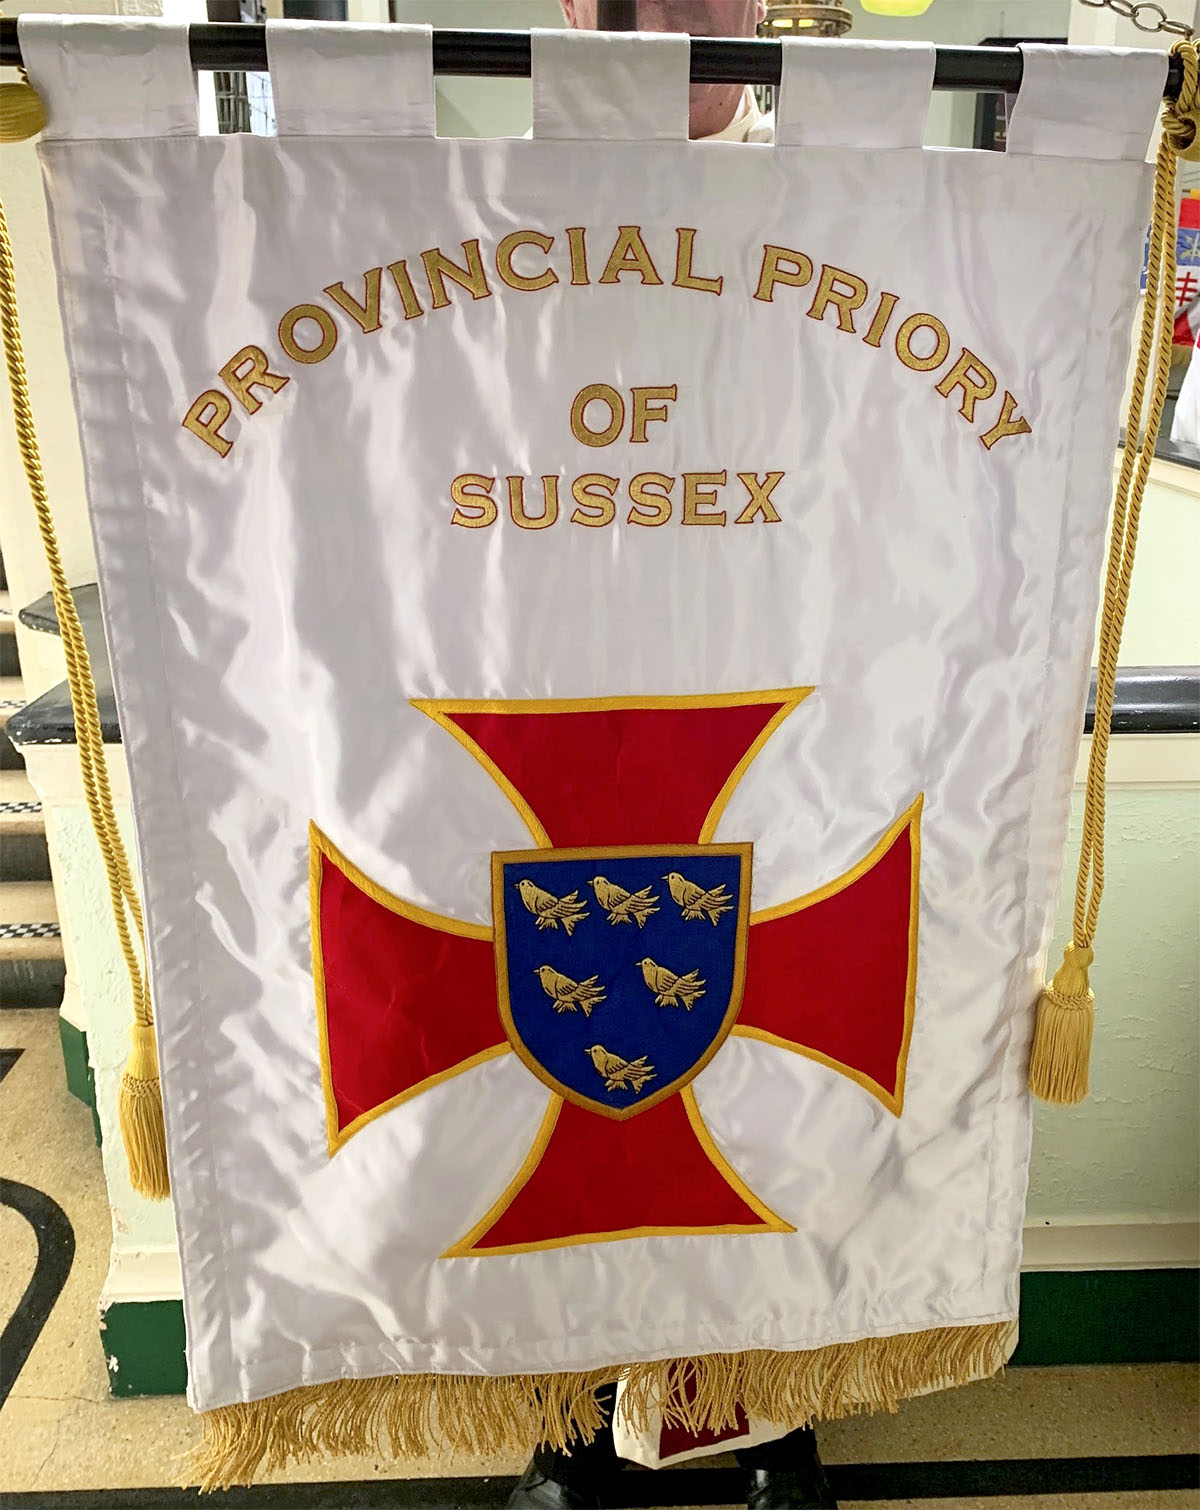 The 150th Anniversary Meeting of the Sussex Provincial Priory